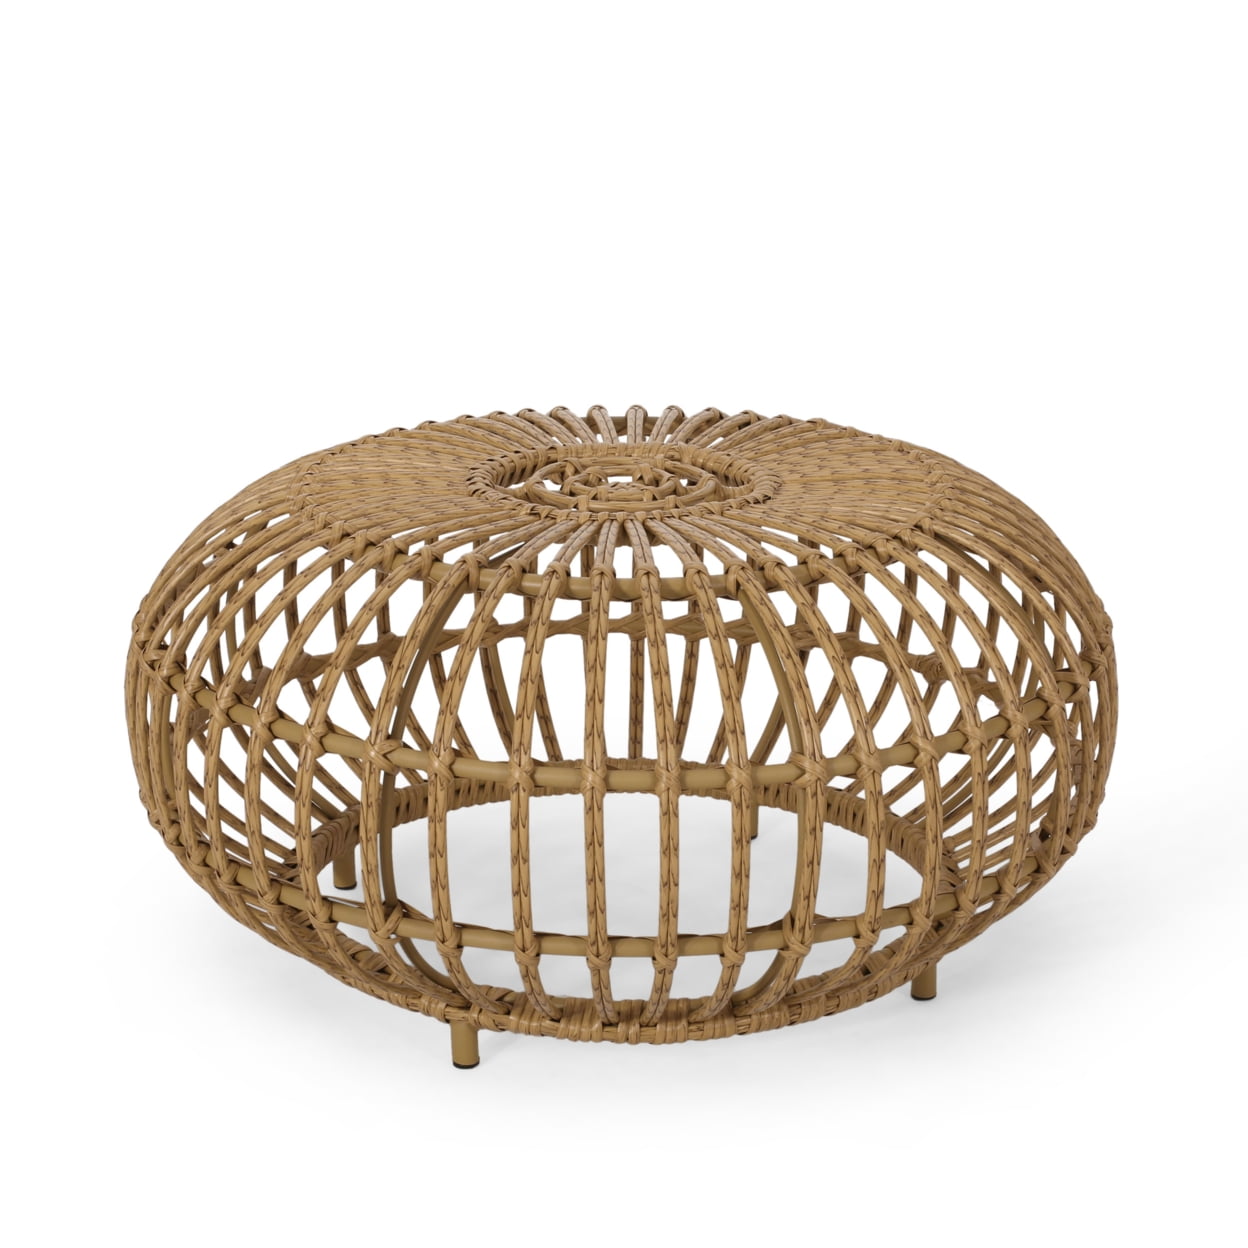 GDF Studio Whitetail Outdoor Boho Wicker Coffee Table, Light Brown - image 1 of 7